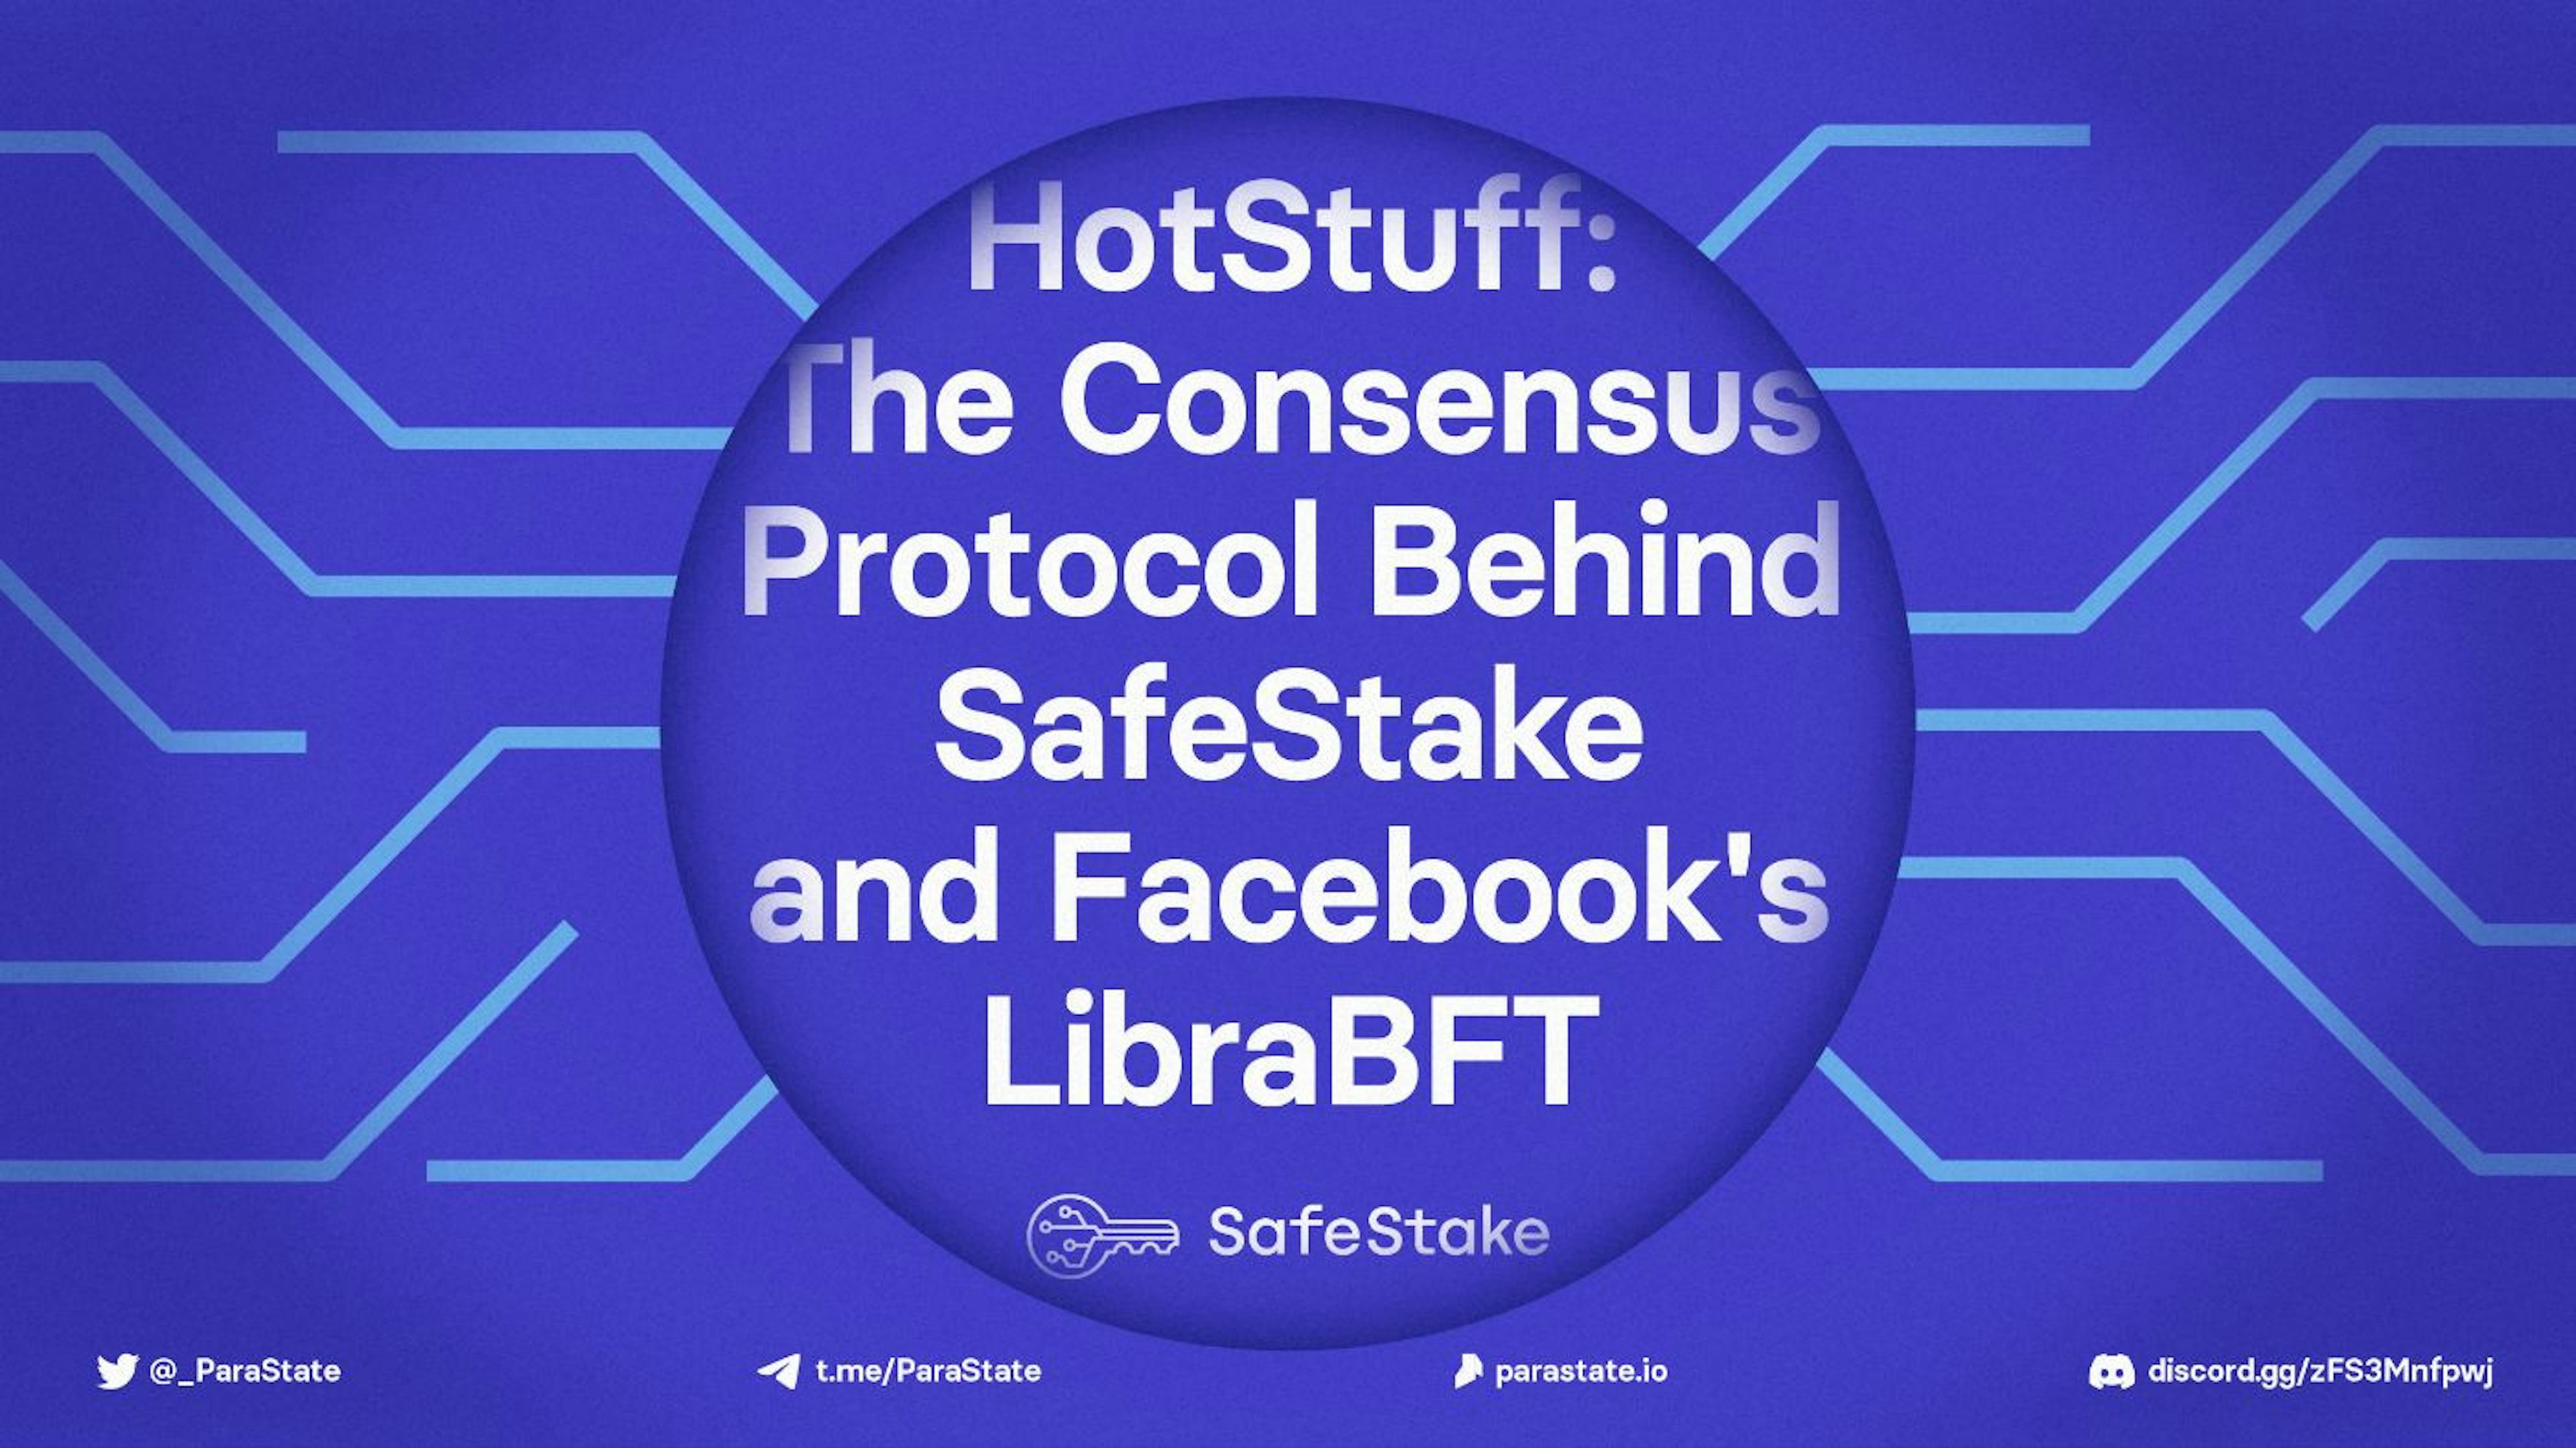 featured image - HotStuff: The Consensus Protocol Behind SafeStake and Facebook's LibraBFT